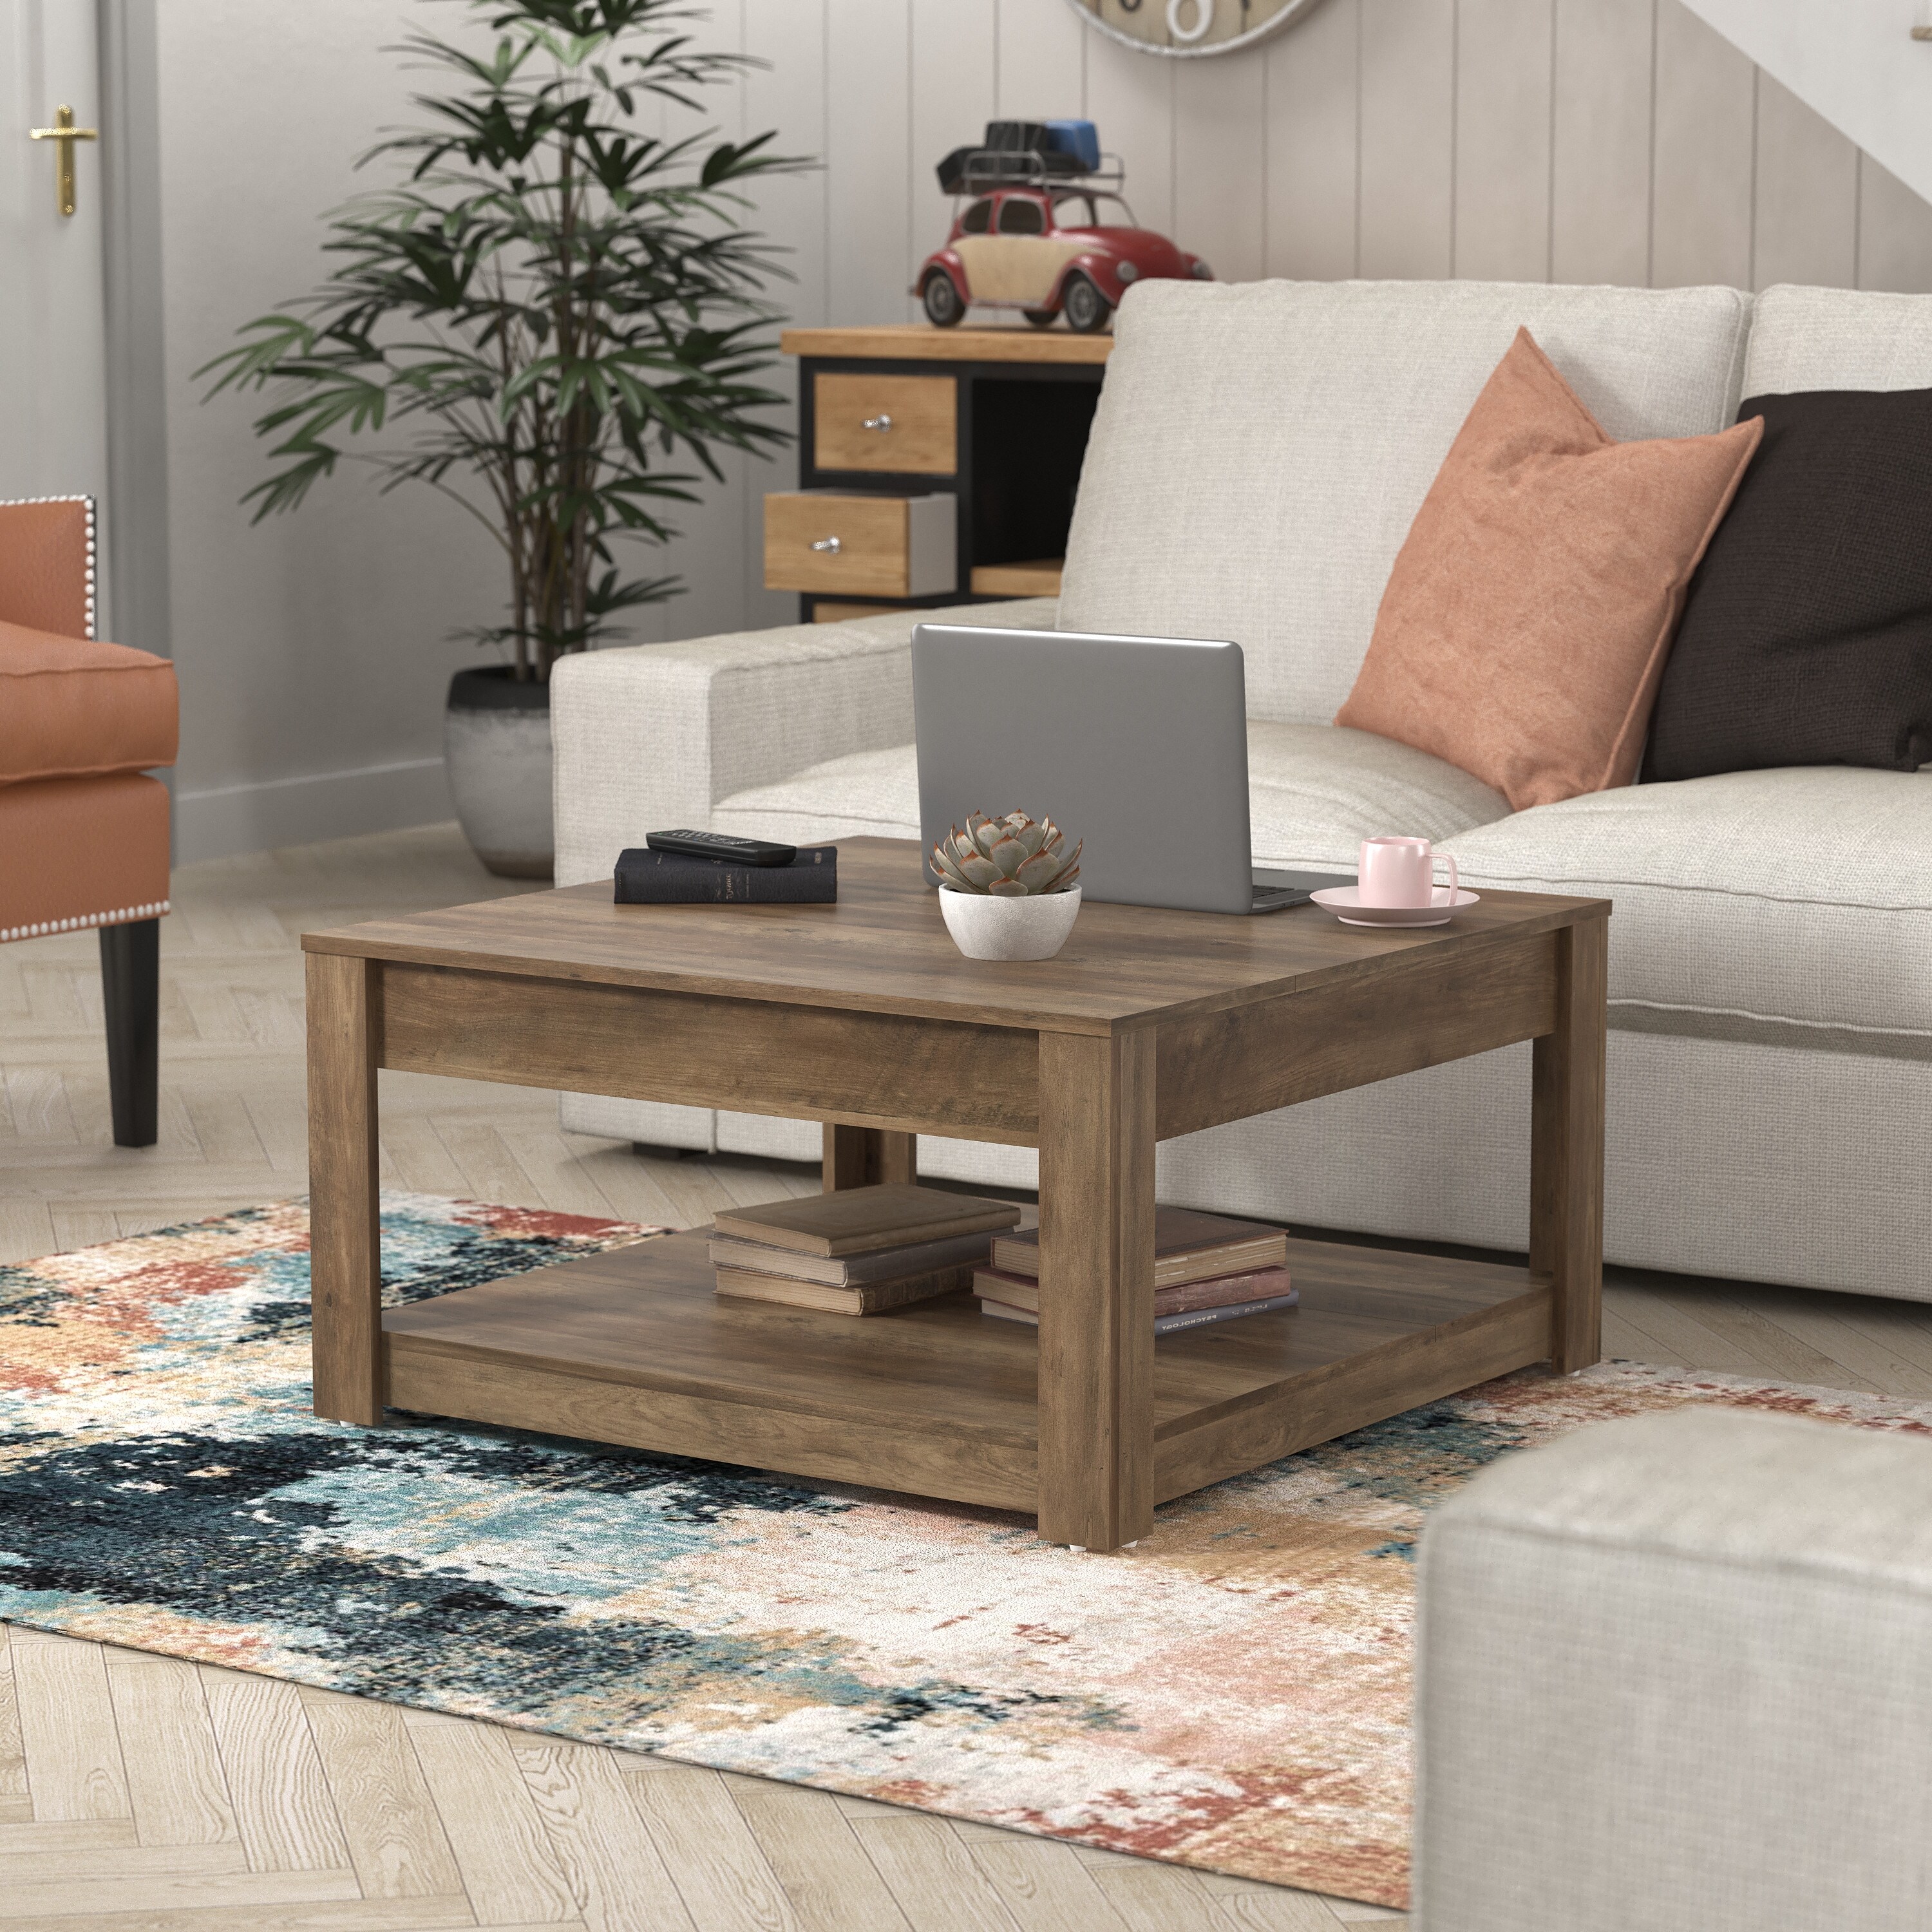 GALANO Philia 31.5 in. Oak Square Wood Top Coffee Table with Storage - 31.5"W x 31.5"D x 16.3"H